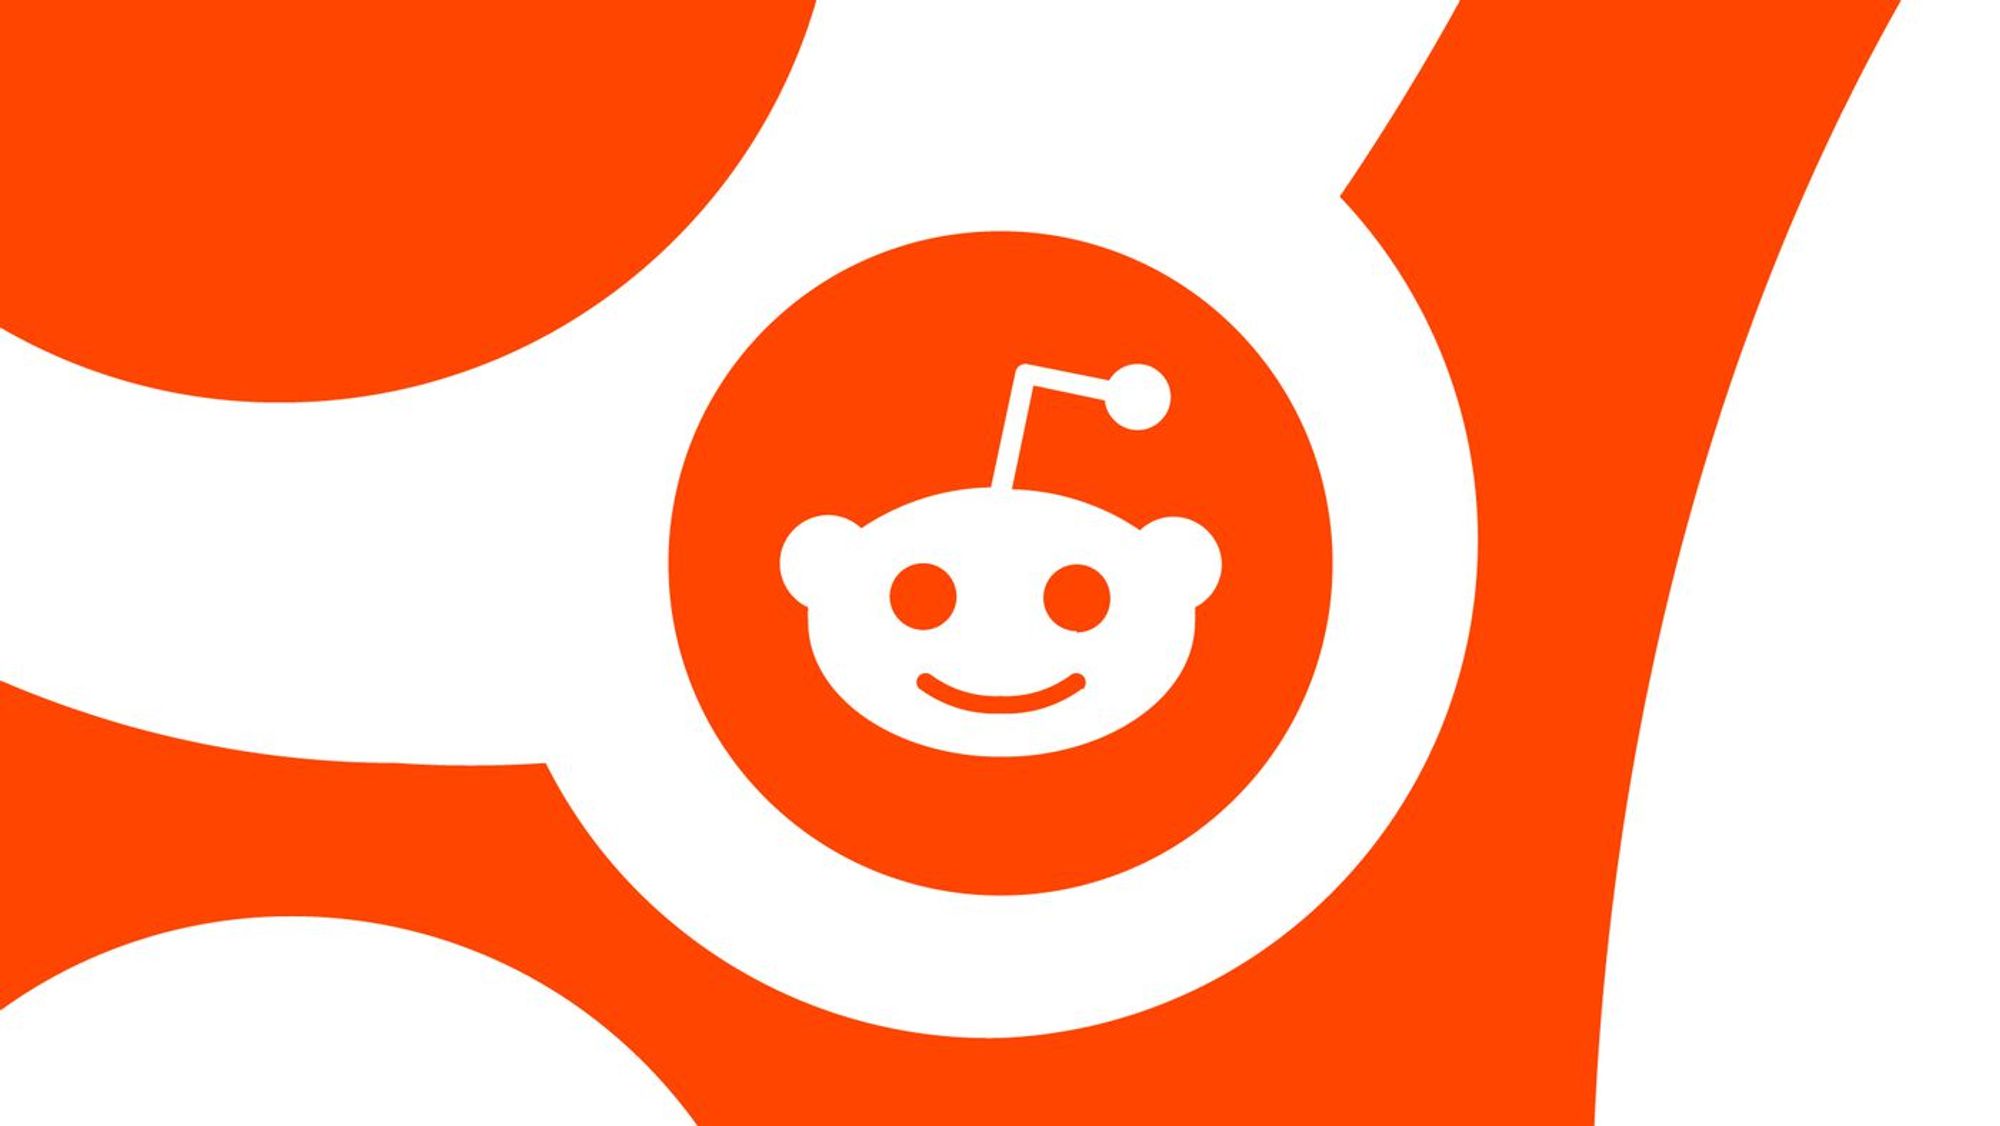 What we’re learning from the Reddit blackout